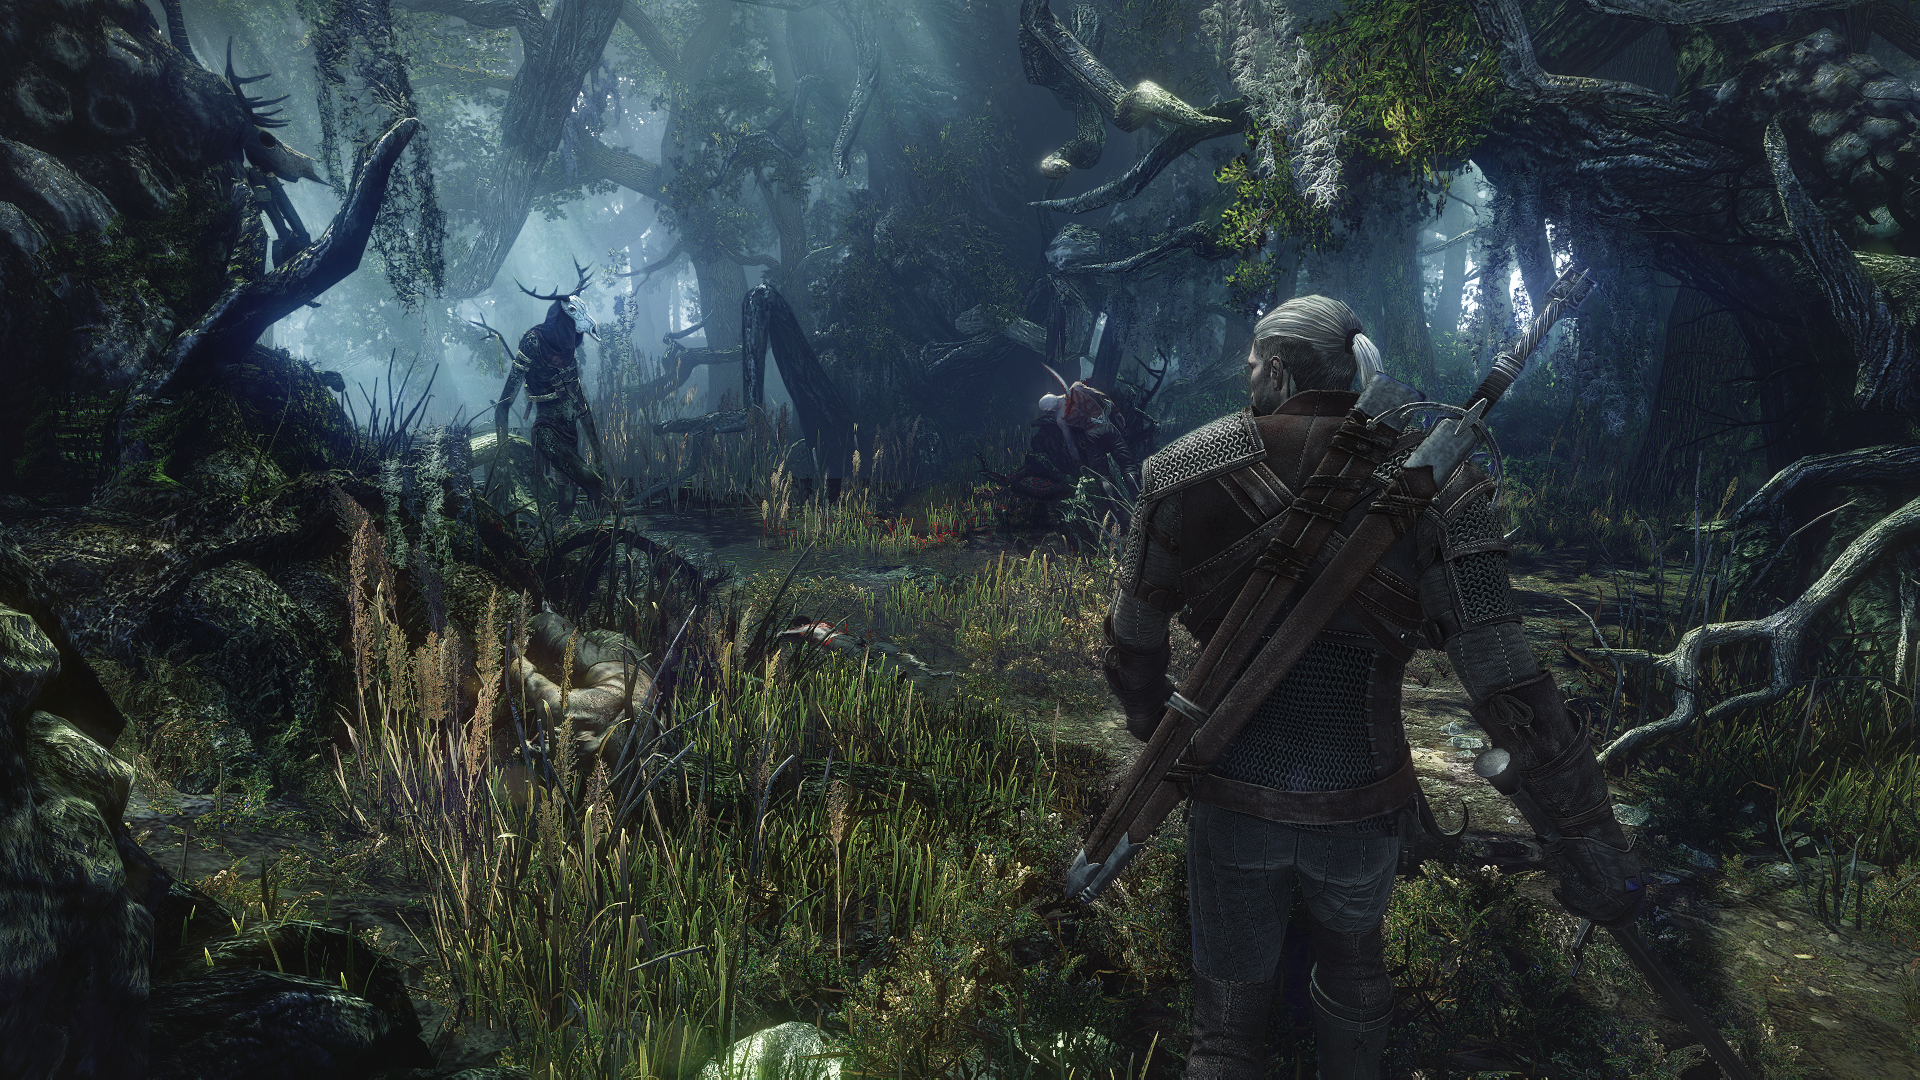 The few times you will die in the Witcher 3, it's due to a lacked of preparedness. 